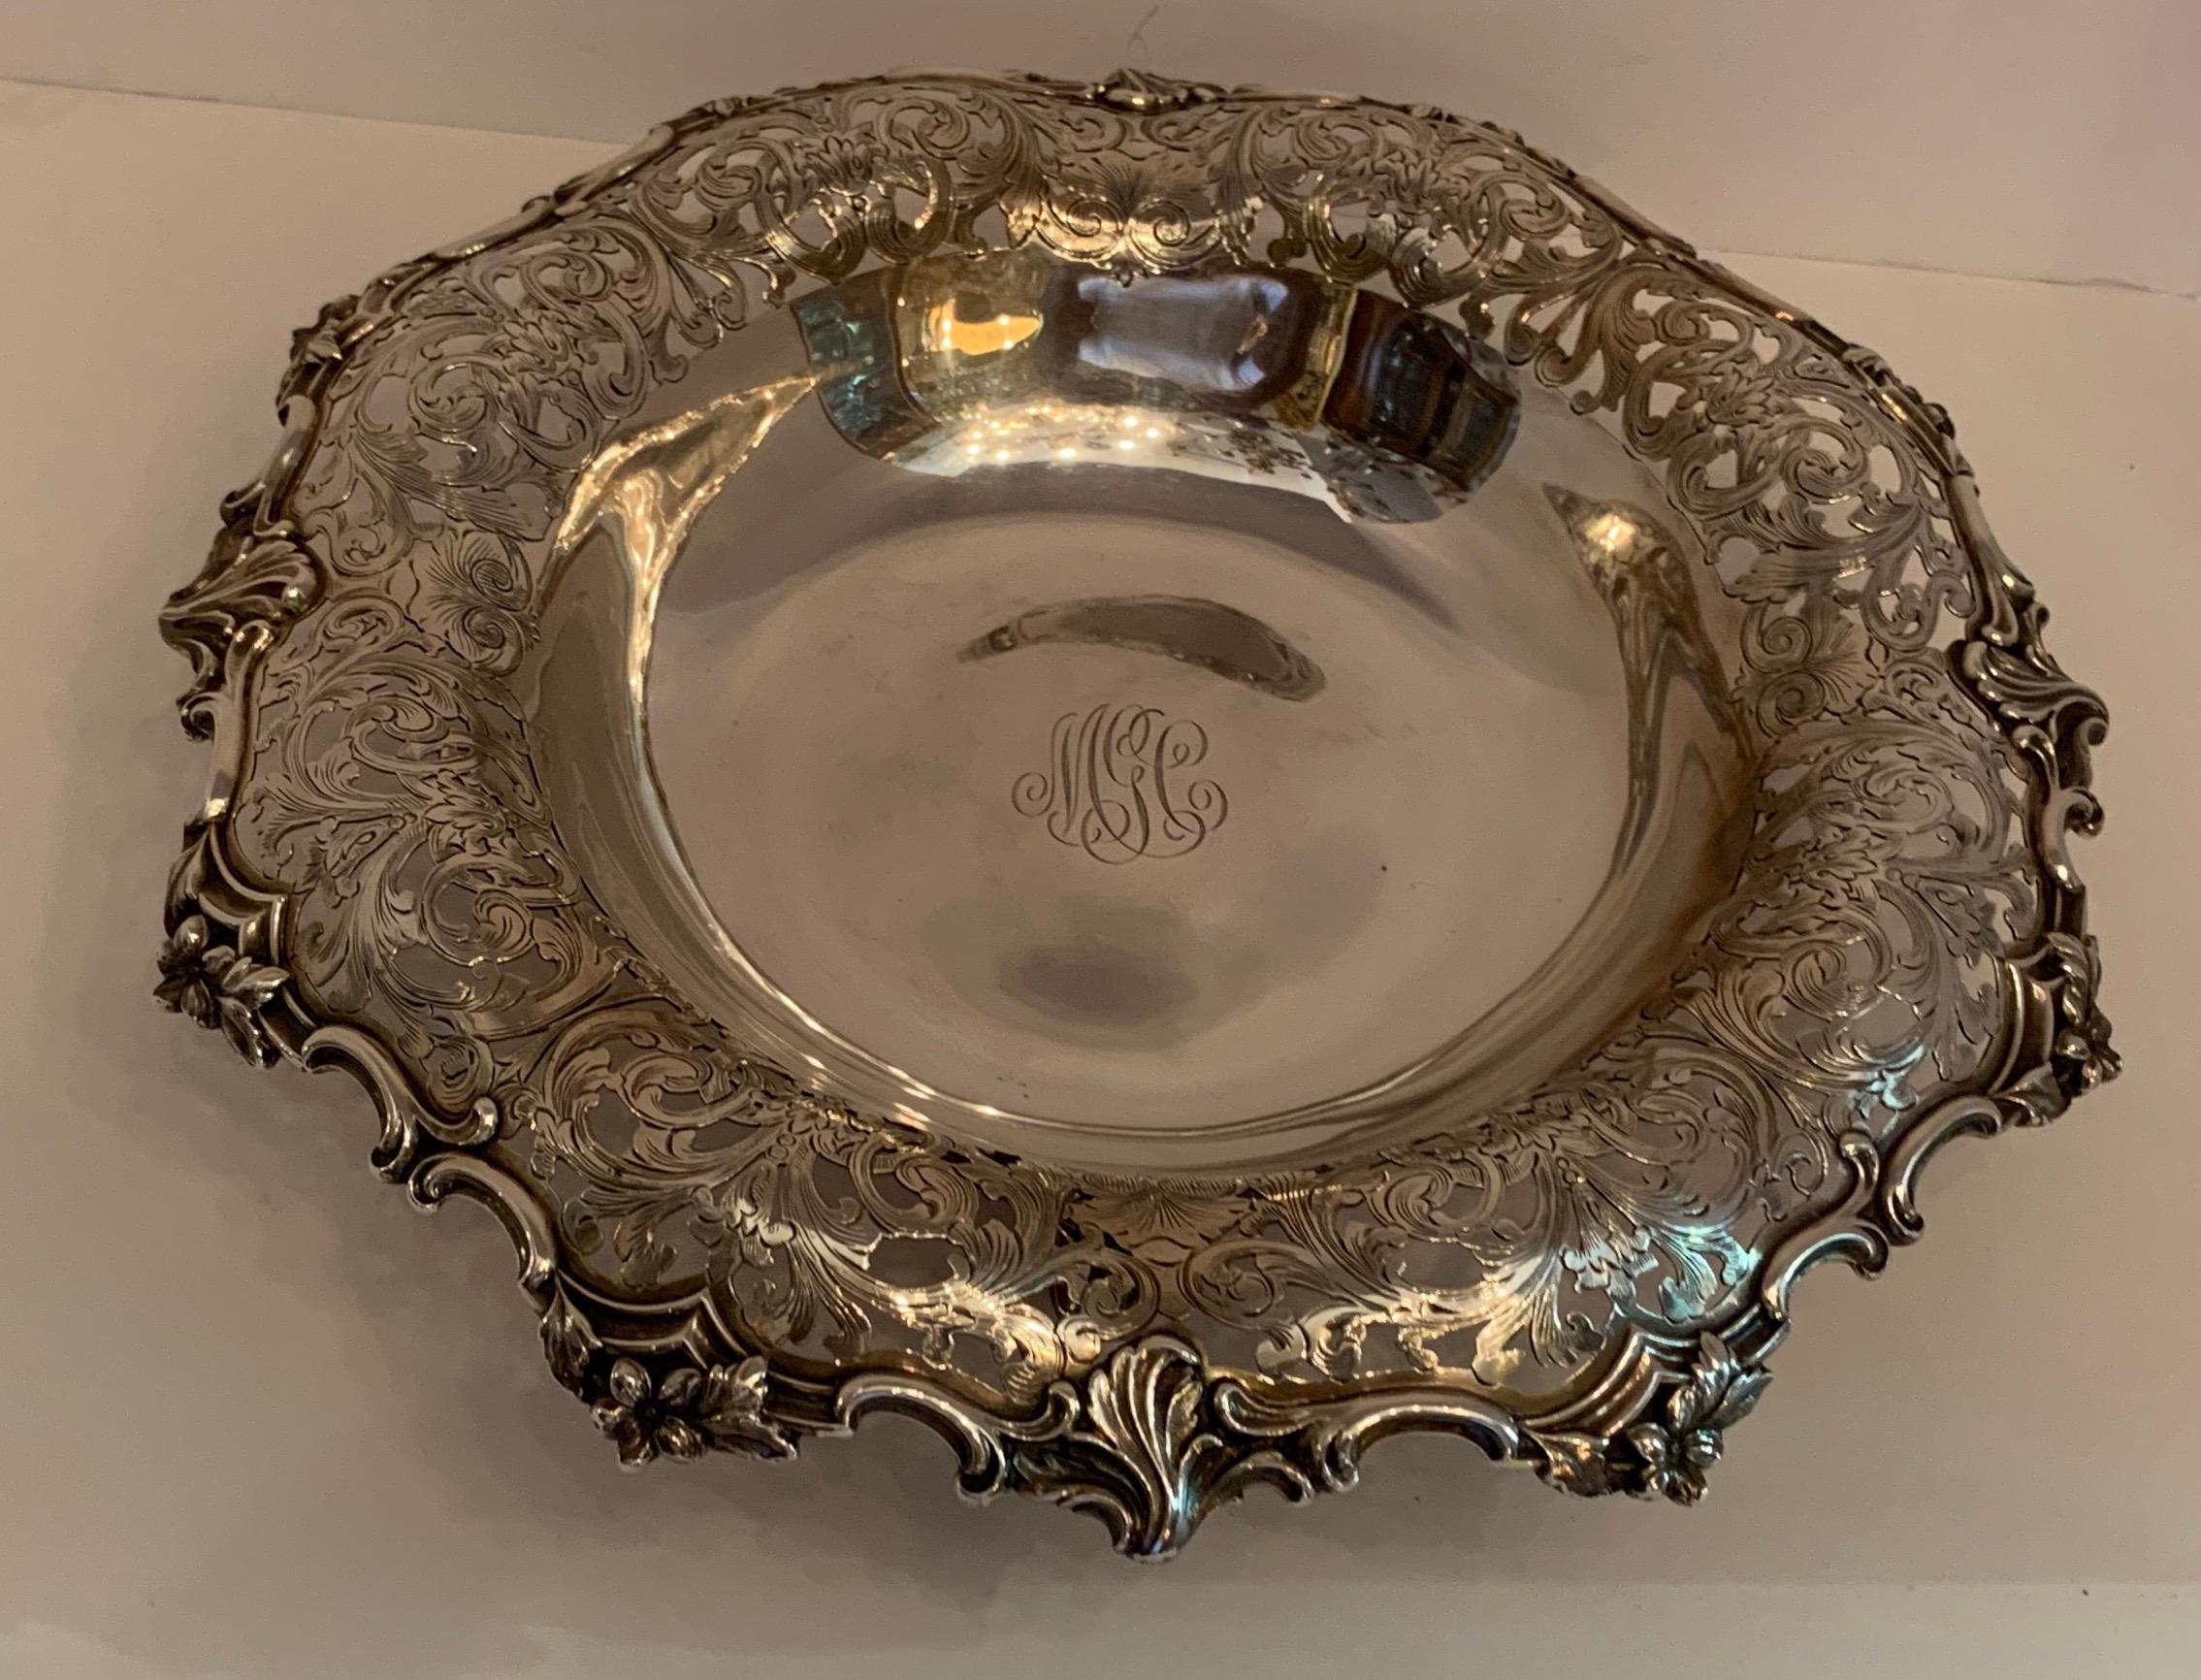 Tiffany & Co. sterling silver centerpiece footed pierced bowl, with slightly turned over scrolling foliage and floral rim and four scrolled feet, circa 1901.
Measures: Approx. 3